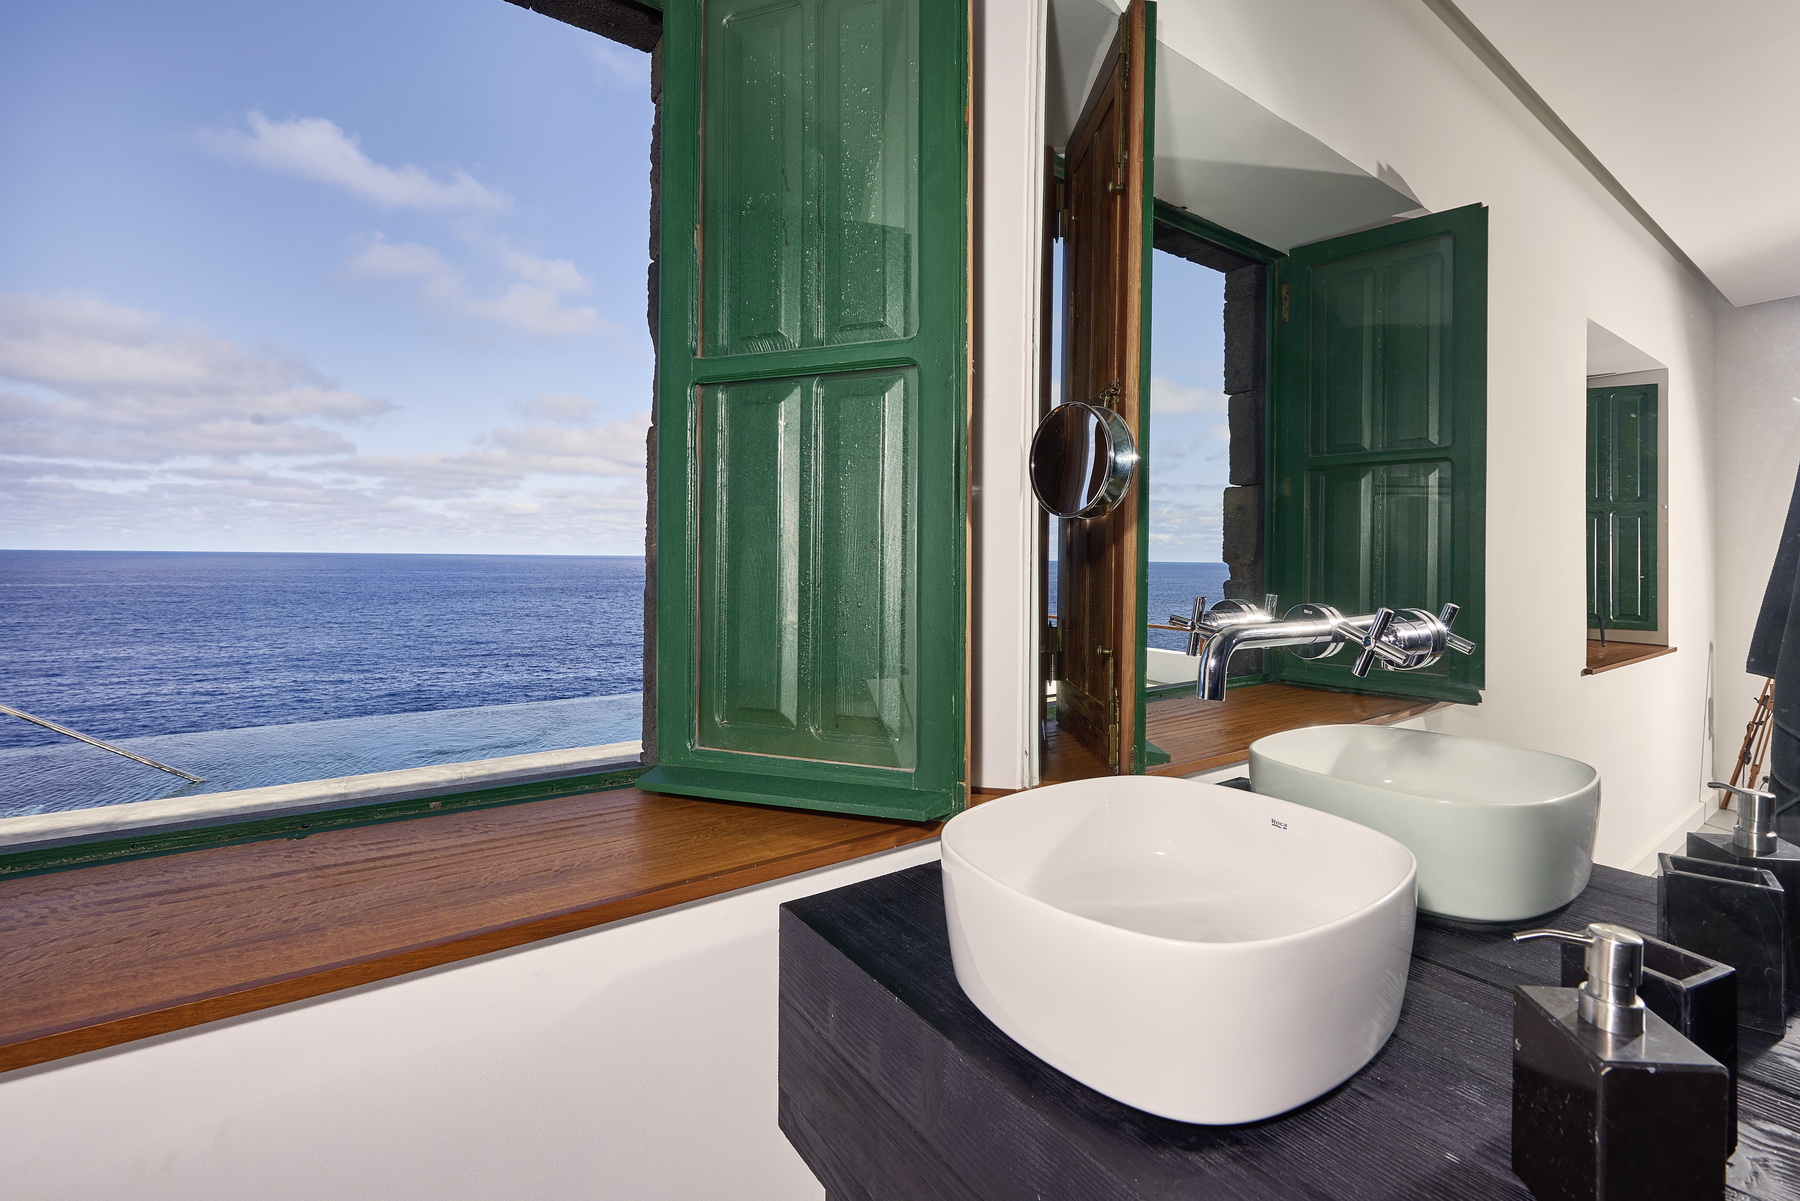 Farero Suite - Bathroom with a view_resize